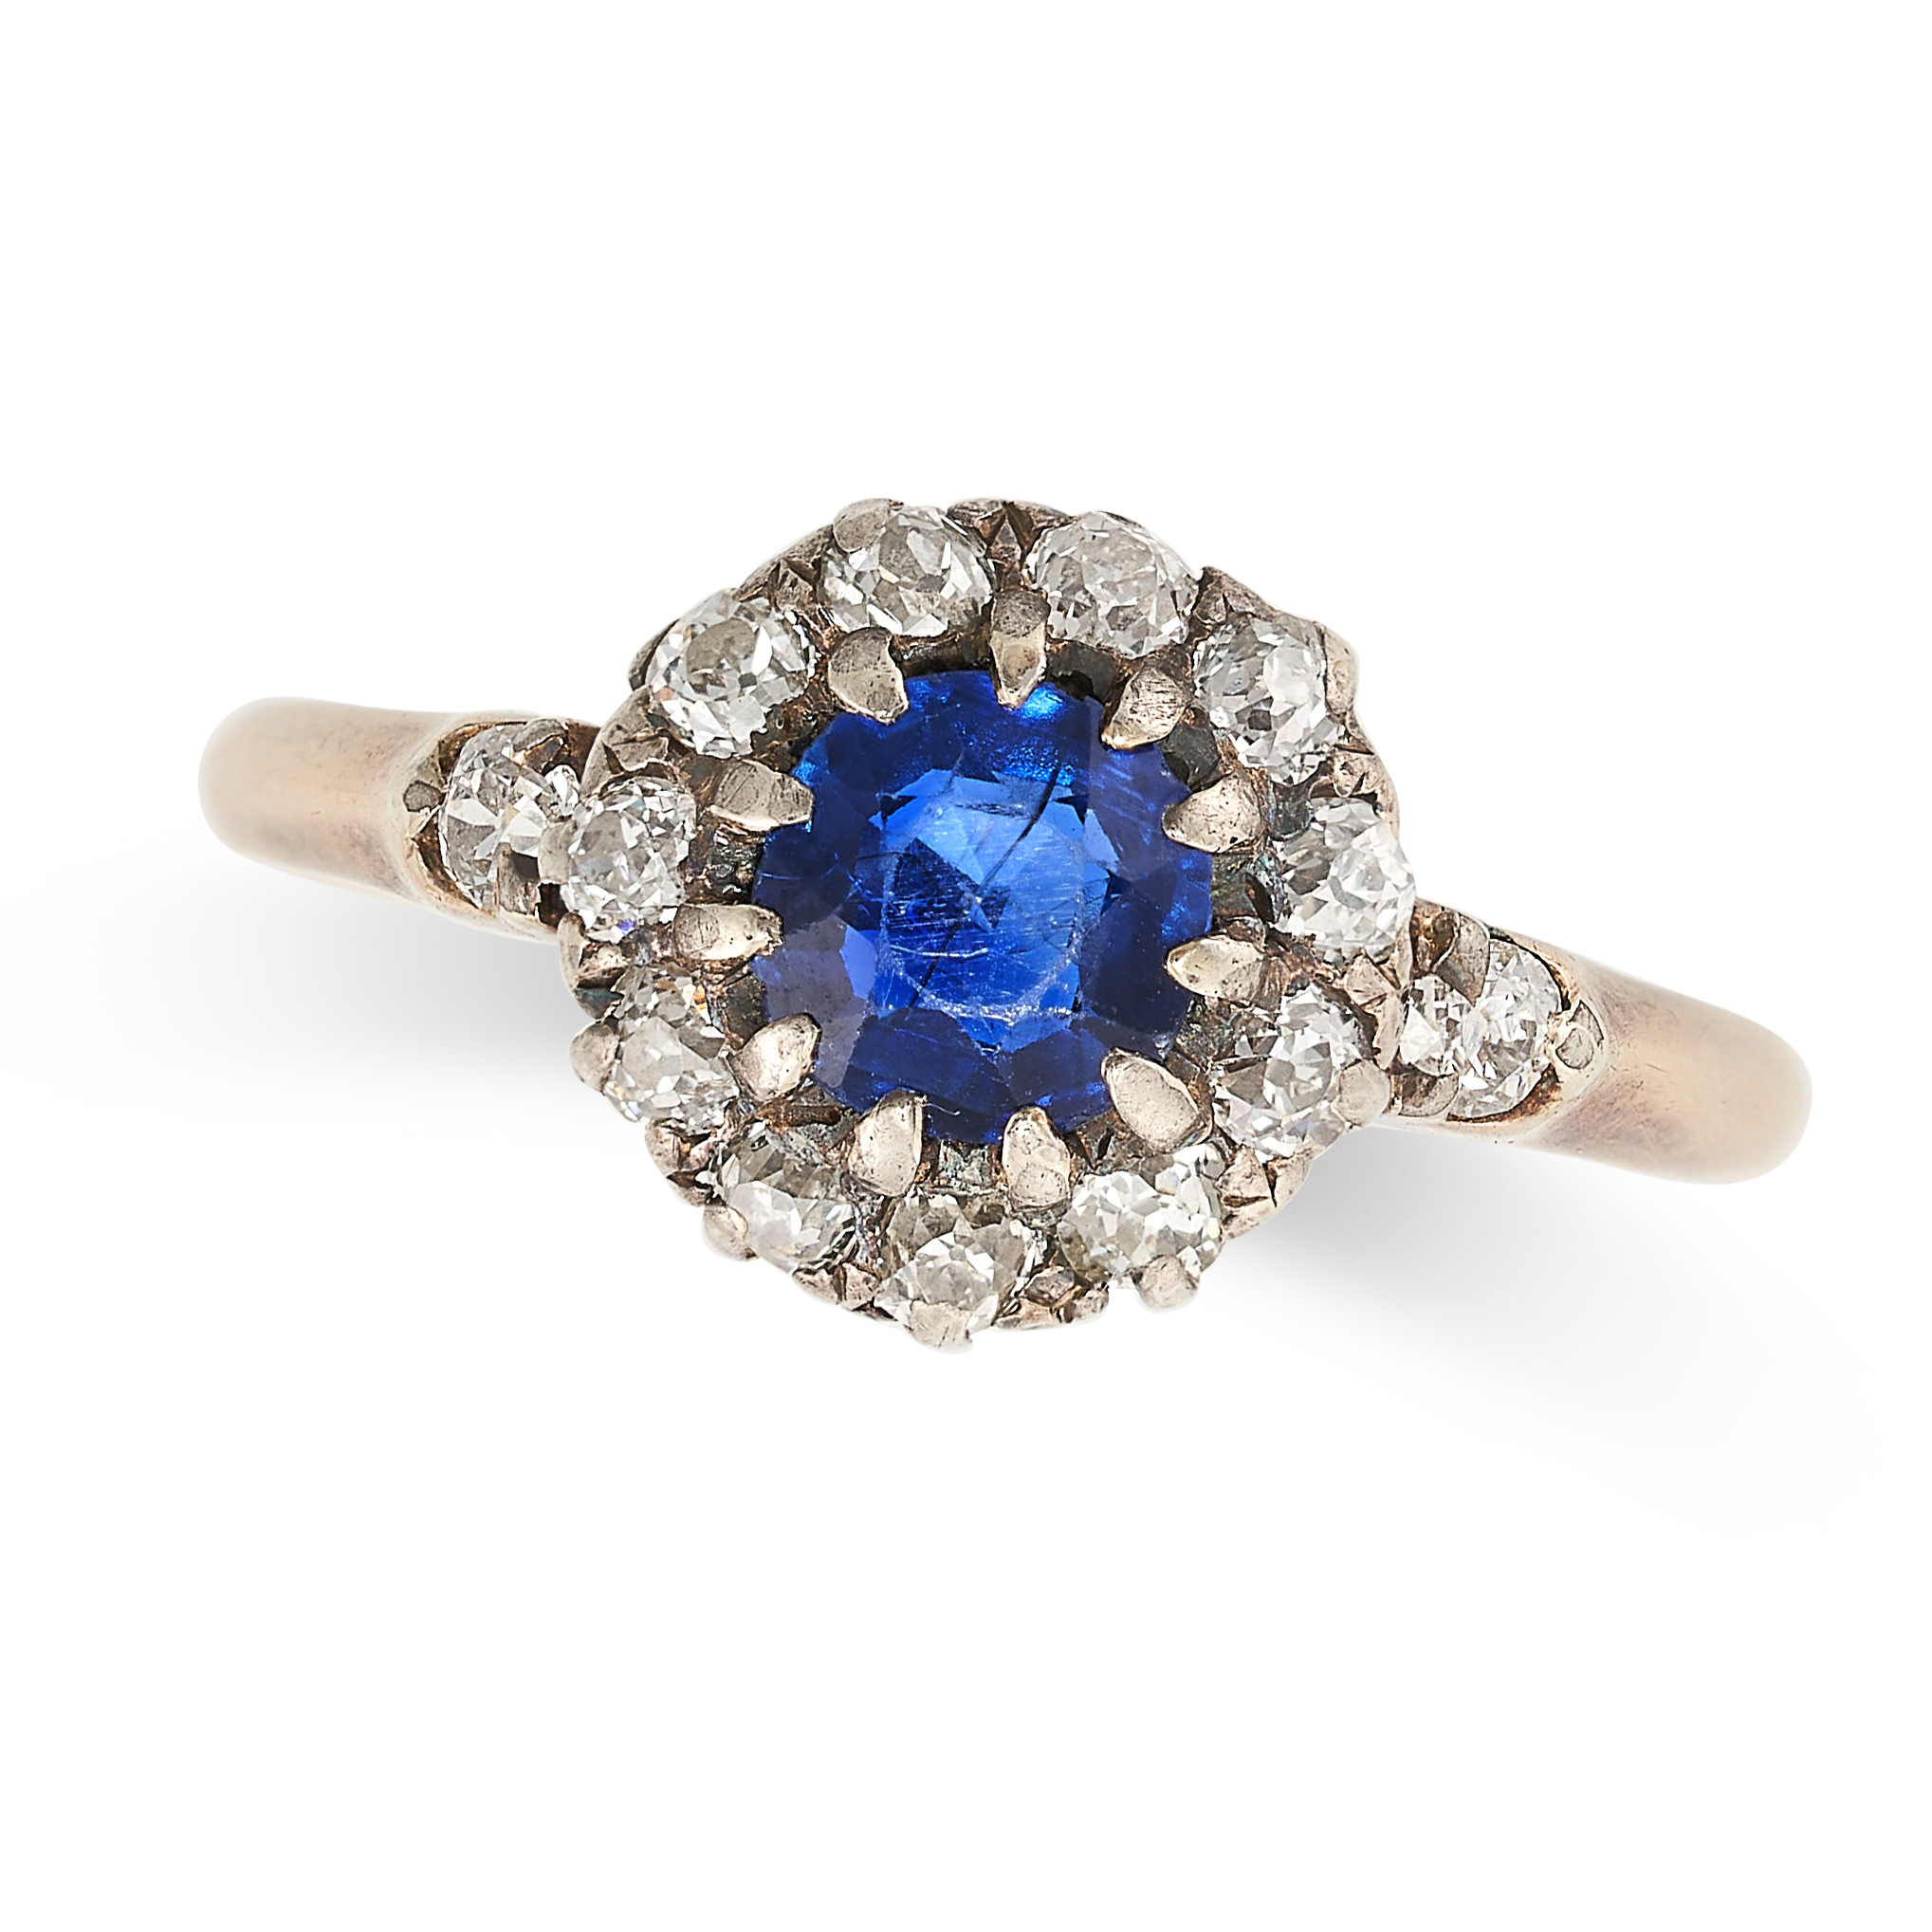 AN ANTIQUE SAPPHIRE AND DIAMOND CLUSTER RING in yellow gold and silver, set with a round cut